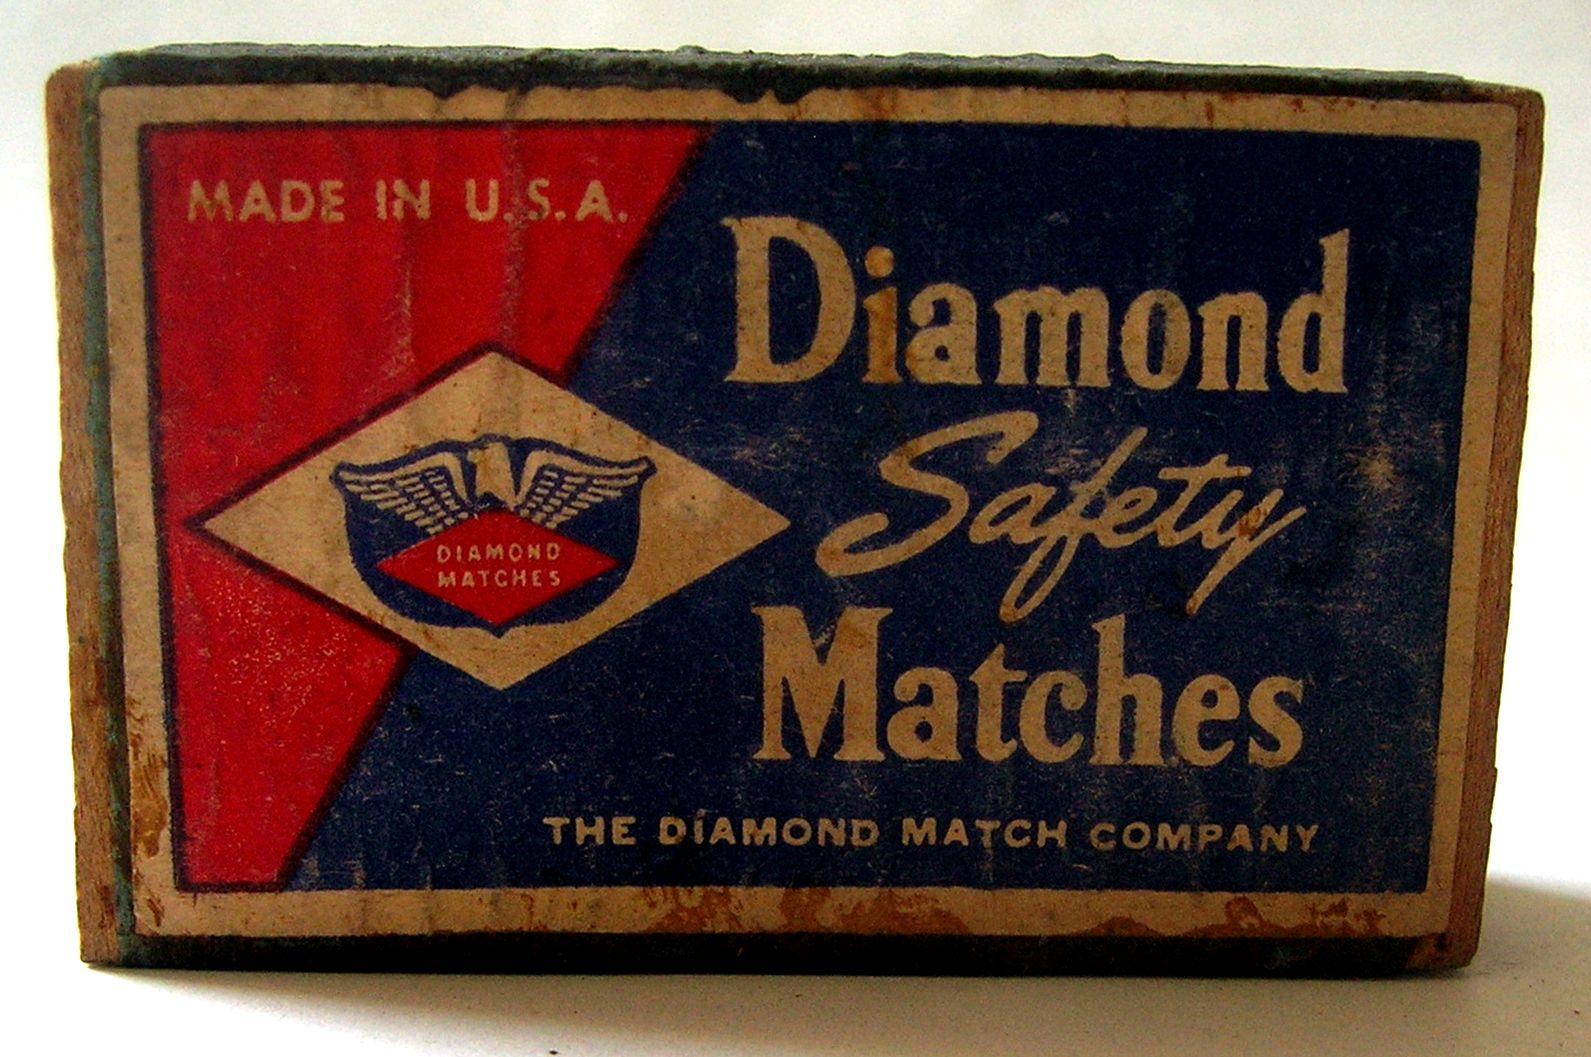 American Match Company Logo - The Secret Blog of a Mad Matchbox Collector: More American Matches